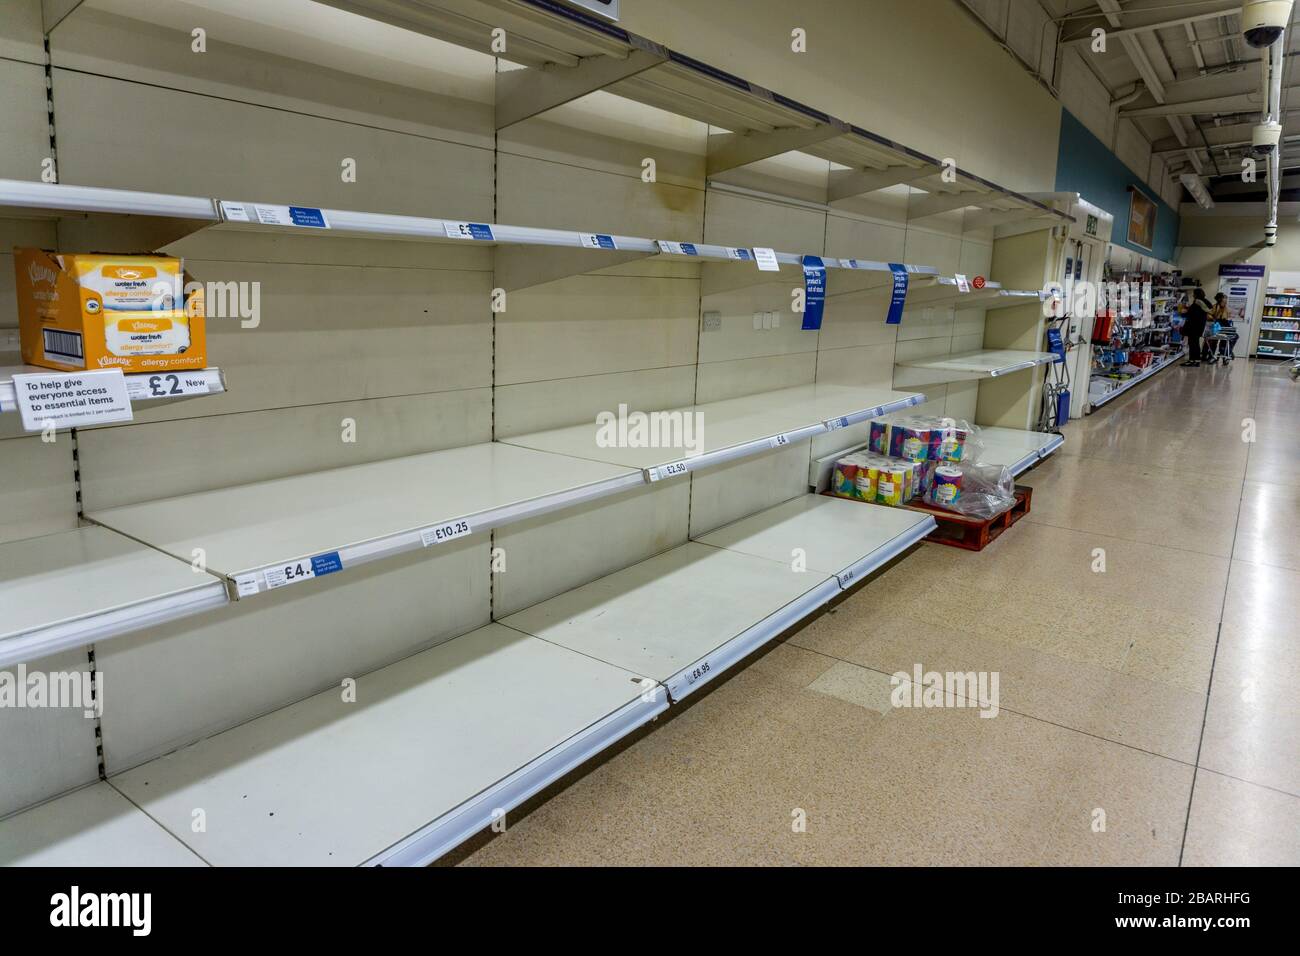 Empty supermarket shelves at Tesco, Viaduct Street, Huddersfield, Saturday morning, 28th March 2020 during the lockdown due to the corono virus pandemic. Stock Photo